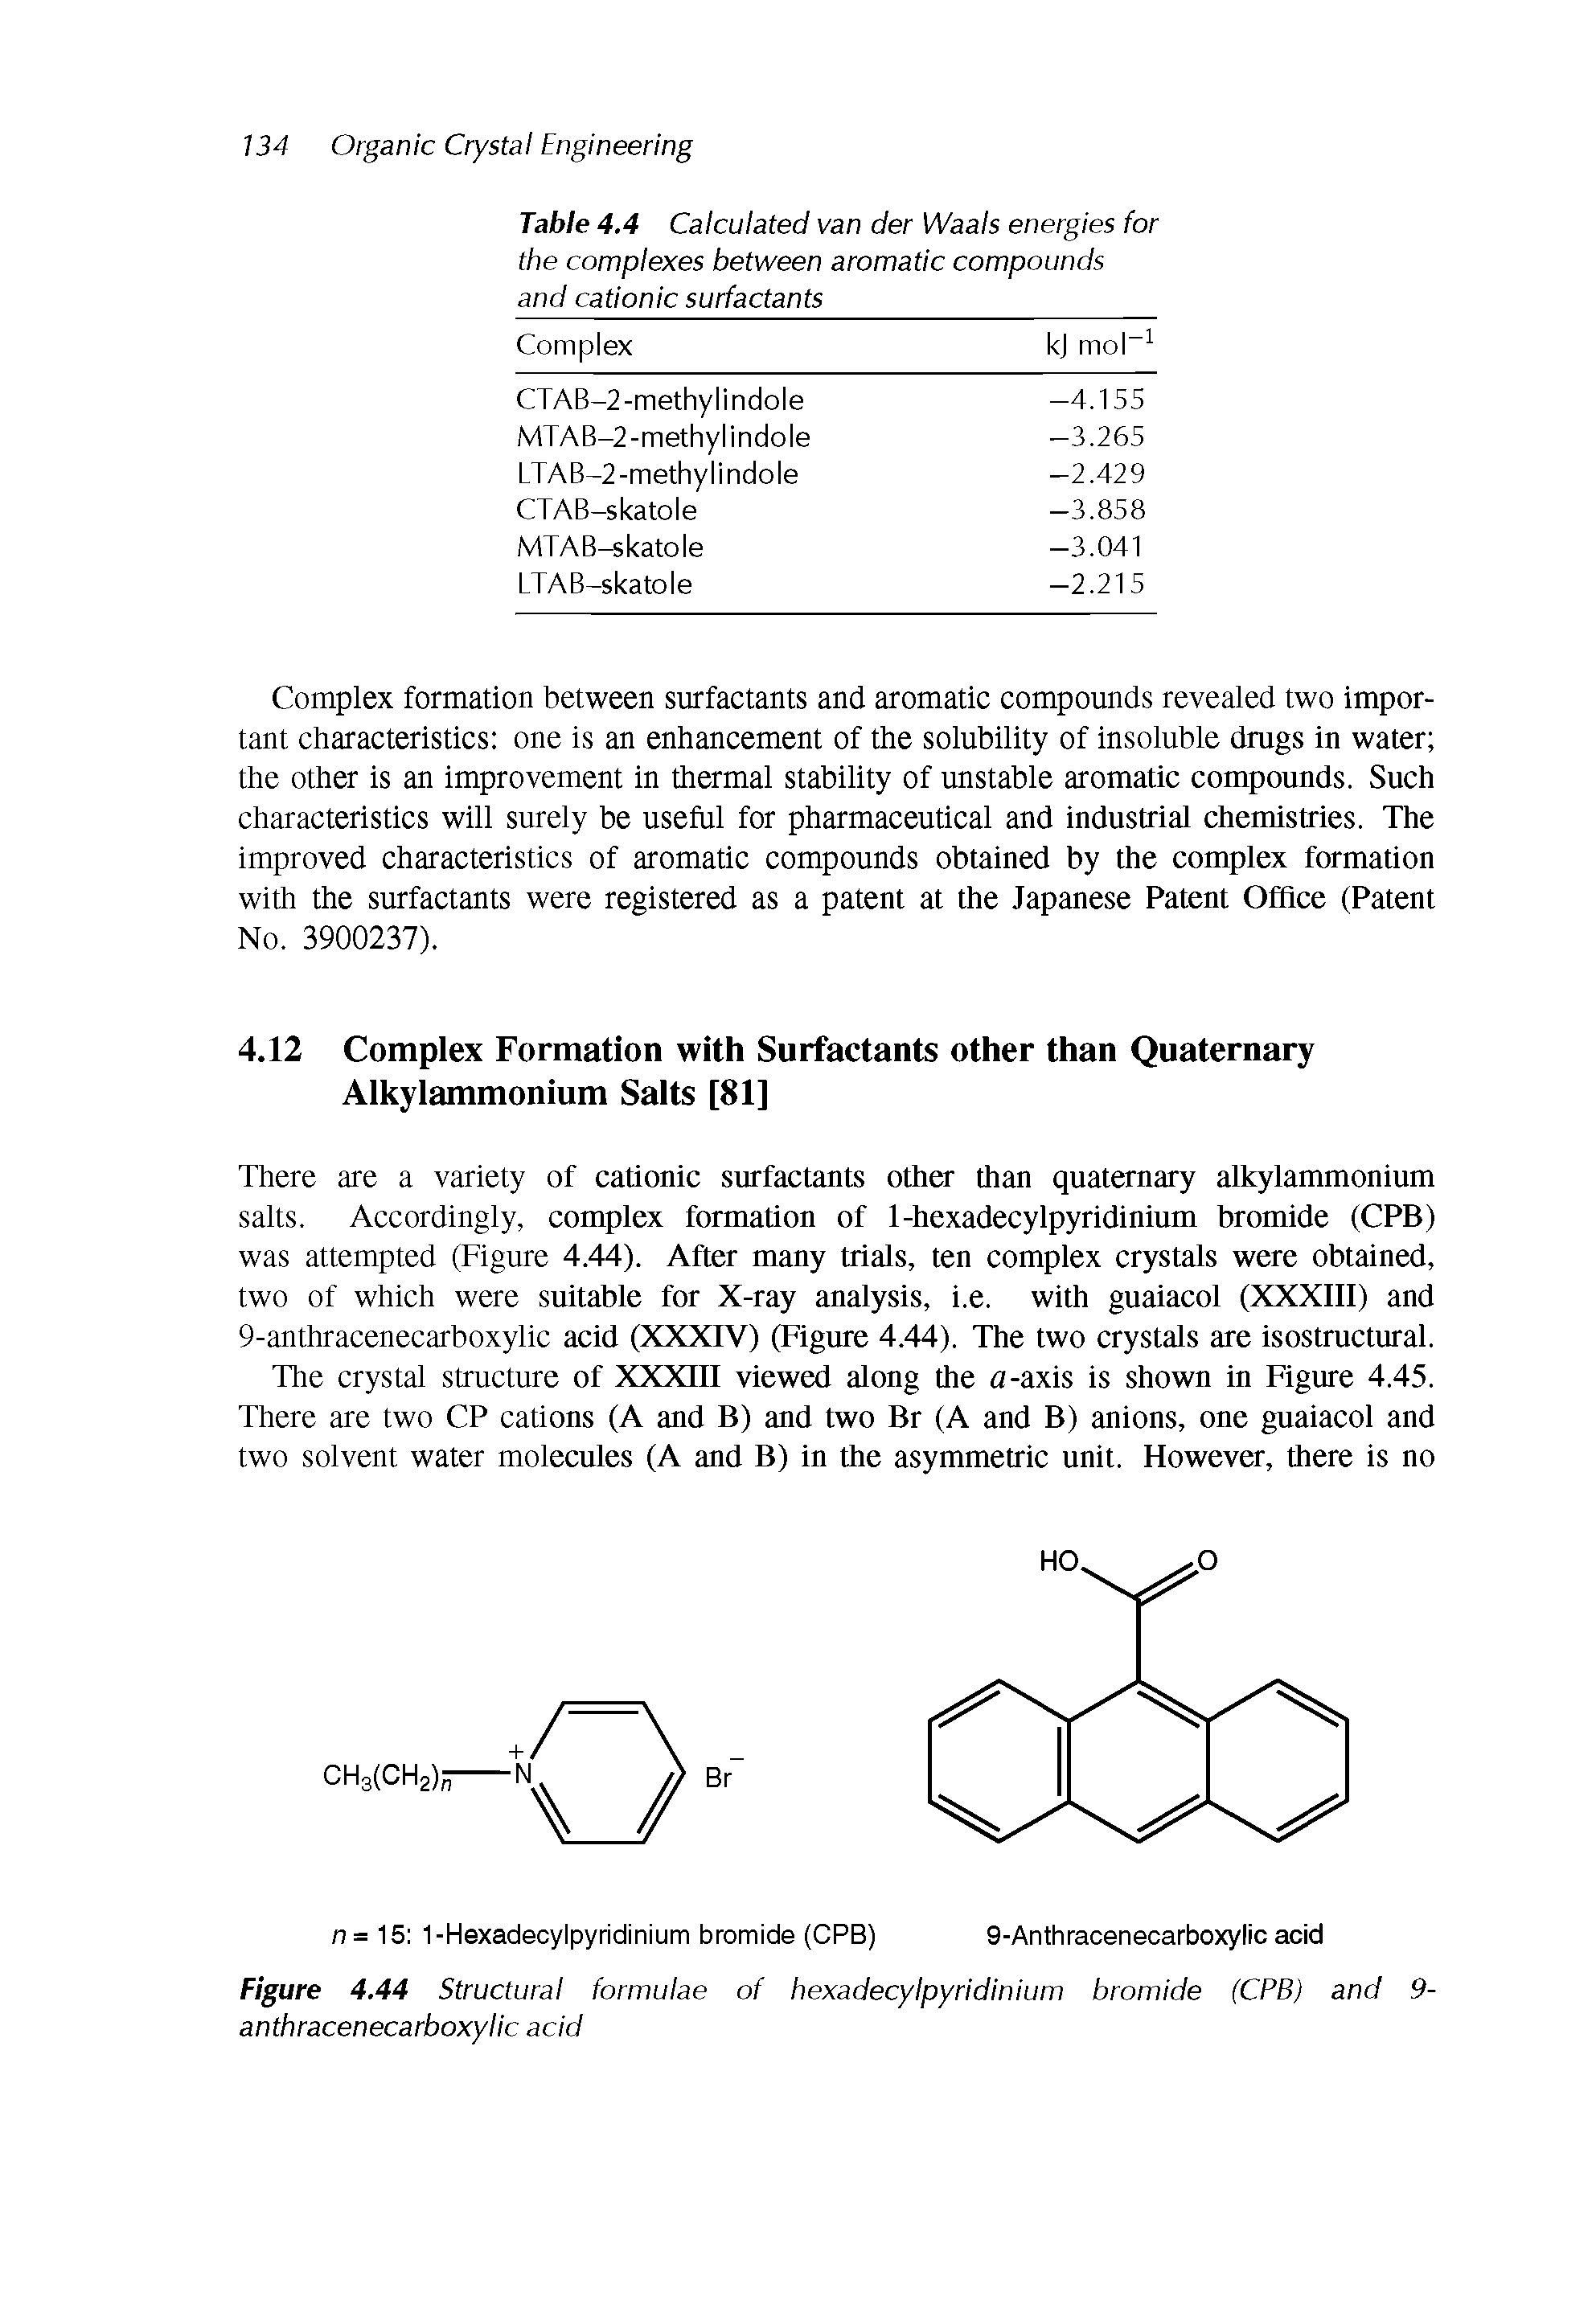 Figure 4.44 Structural formulae of hexadecylpyridinium bromide (CPB) and 9-anthracenecarboxylic acid...